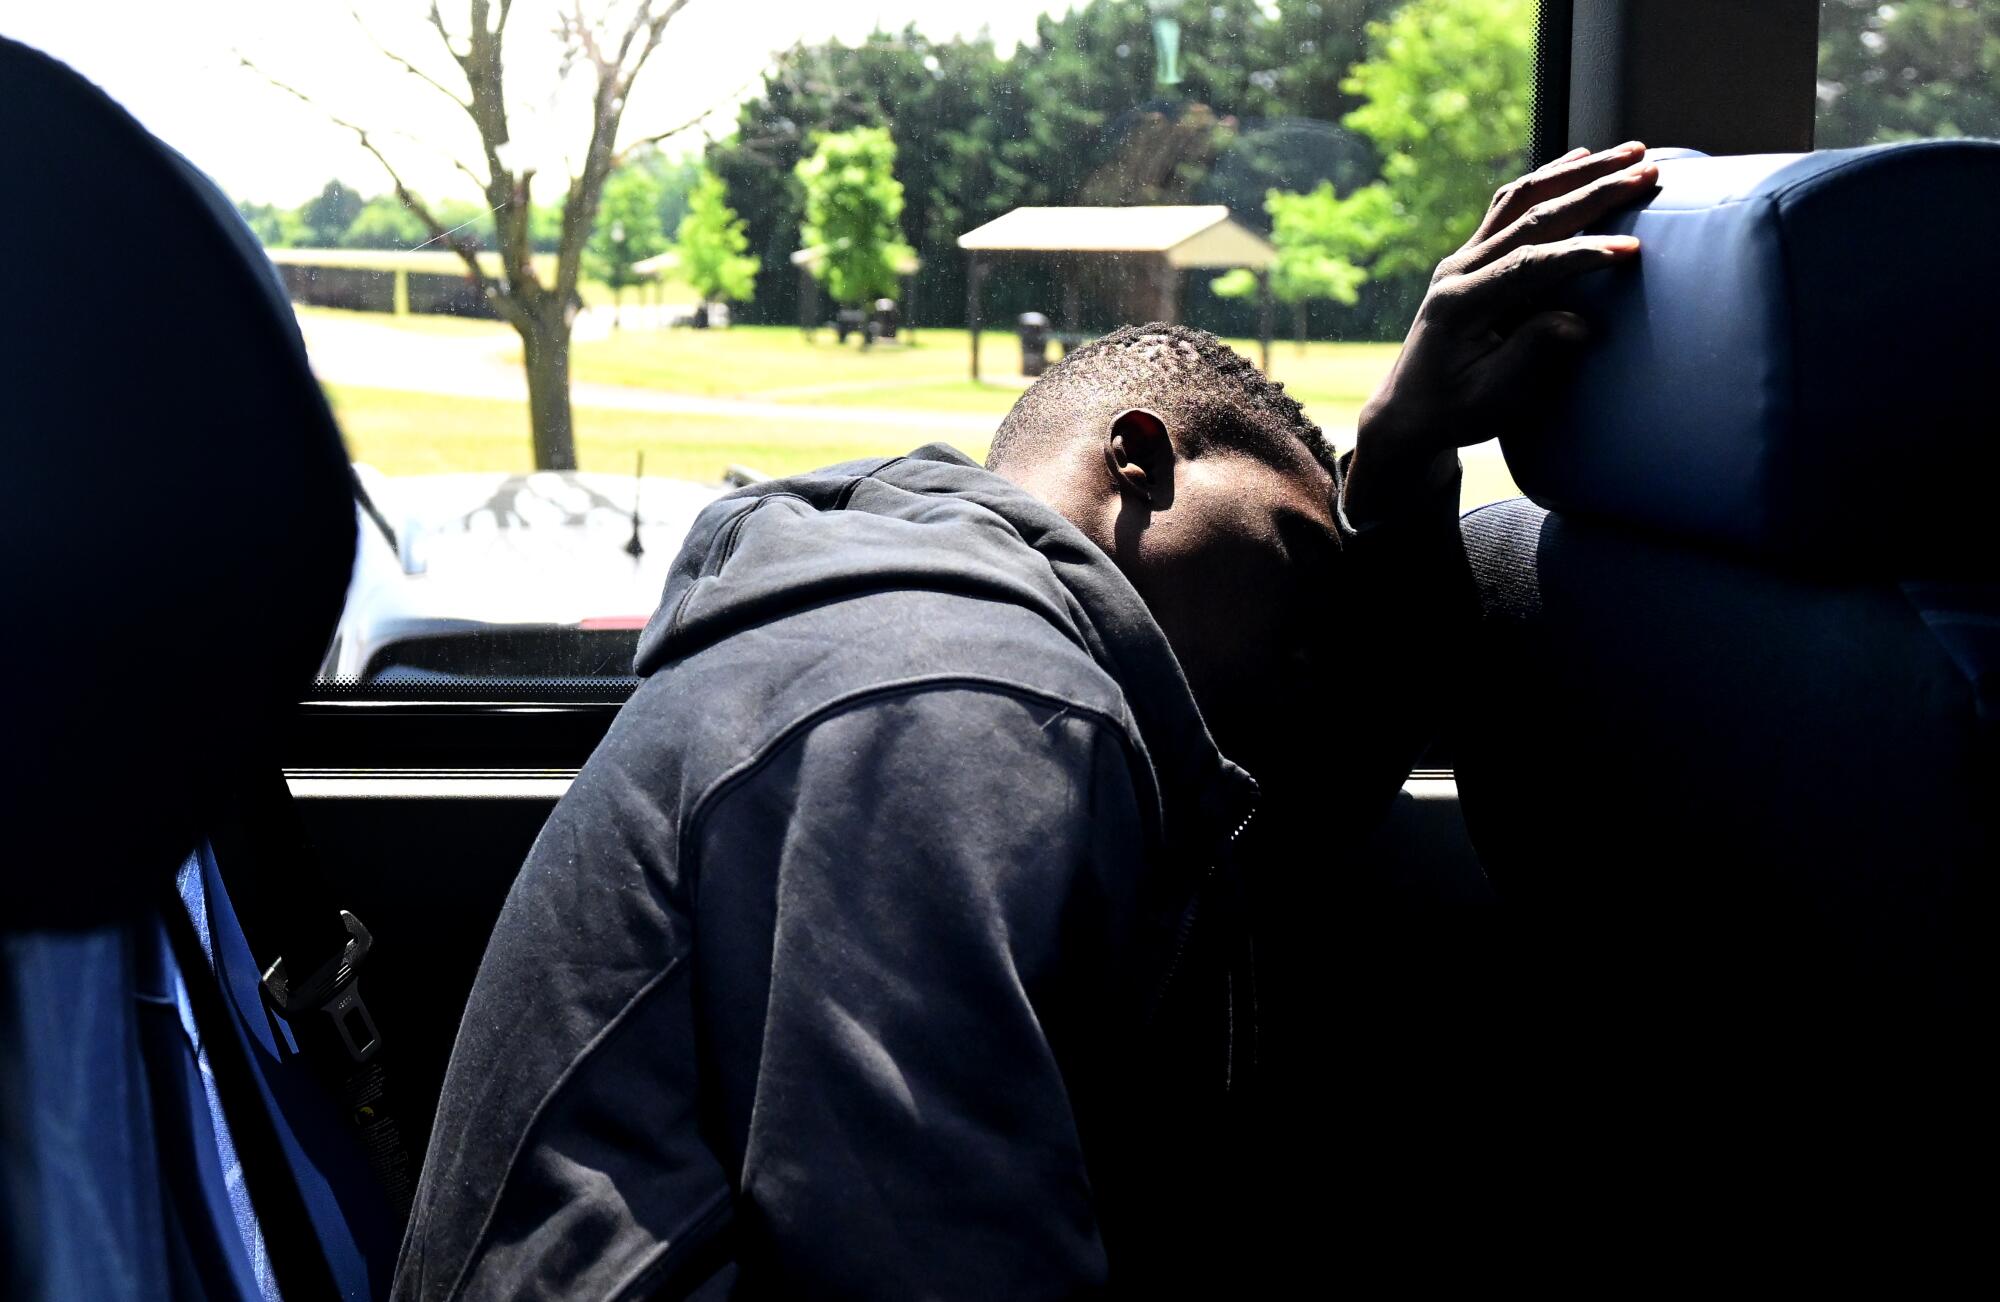 Jet-lagged Dennis Kasumba tries to sleep on a bus in Frederick, Maryland, headed to Trenton, New Jersey.